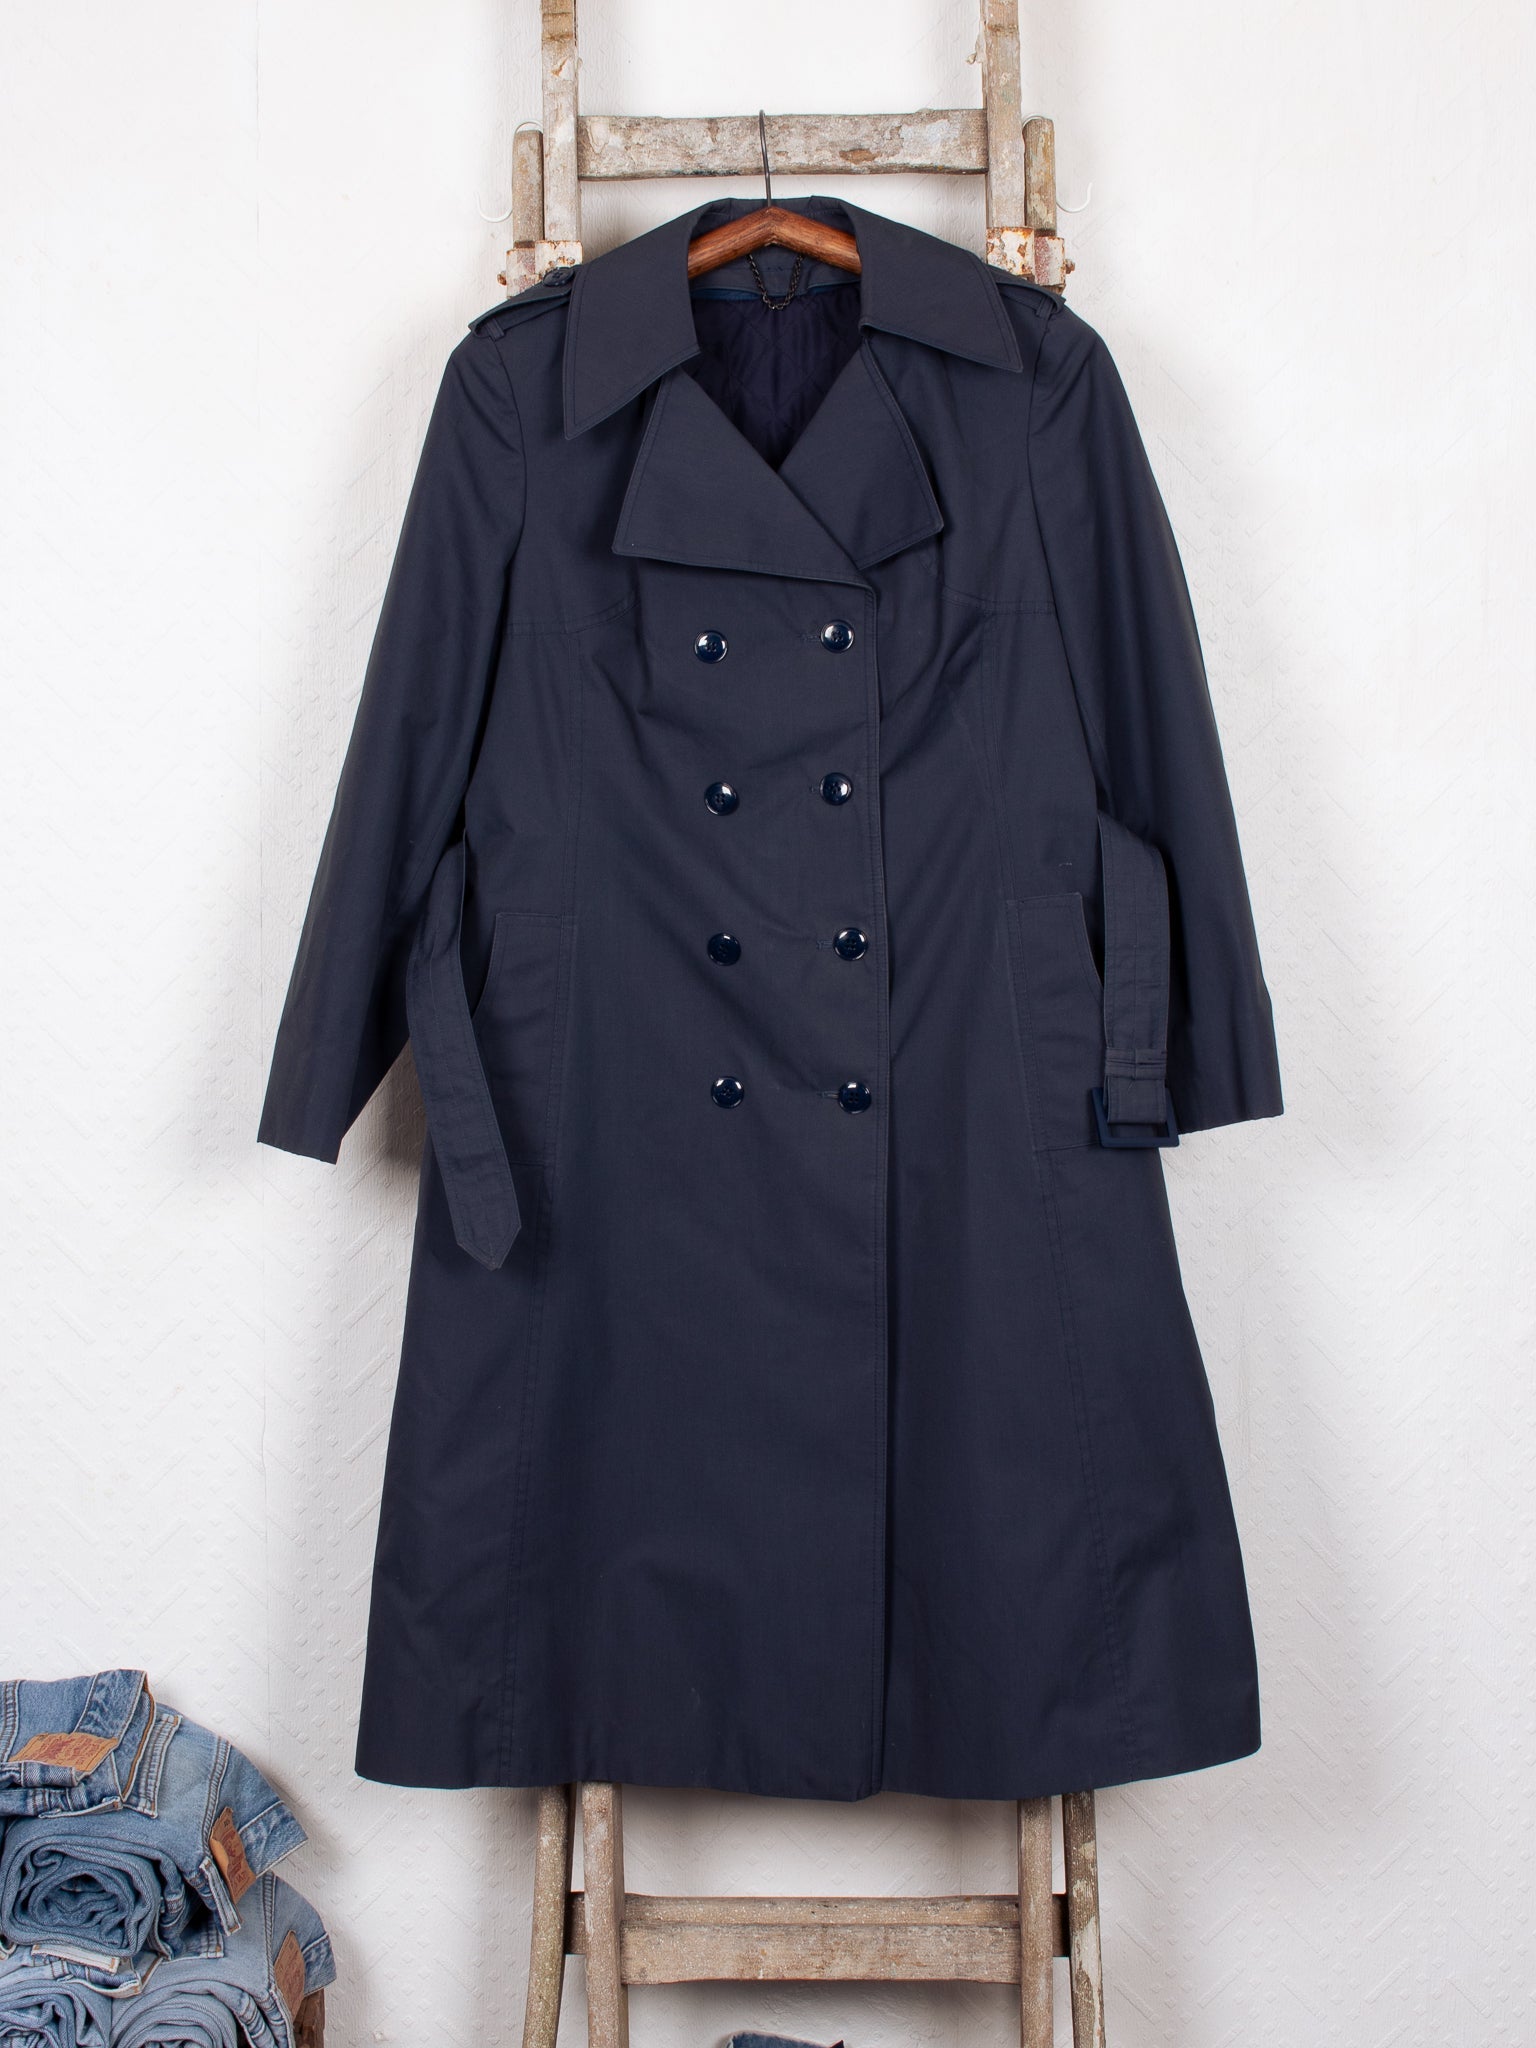 outerwear 1977 Belgian Airforce Trench Coat - M